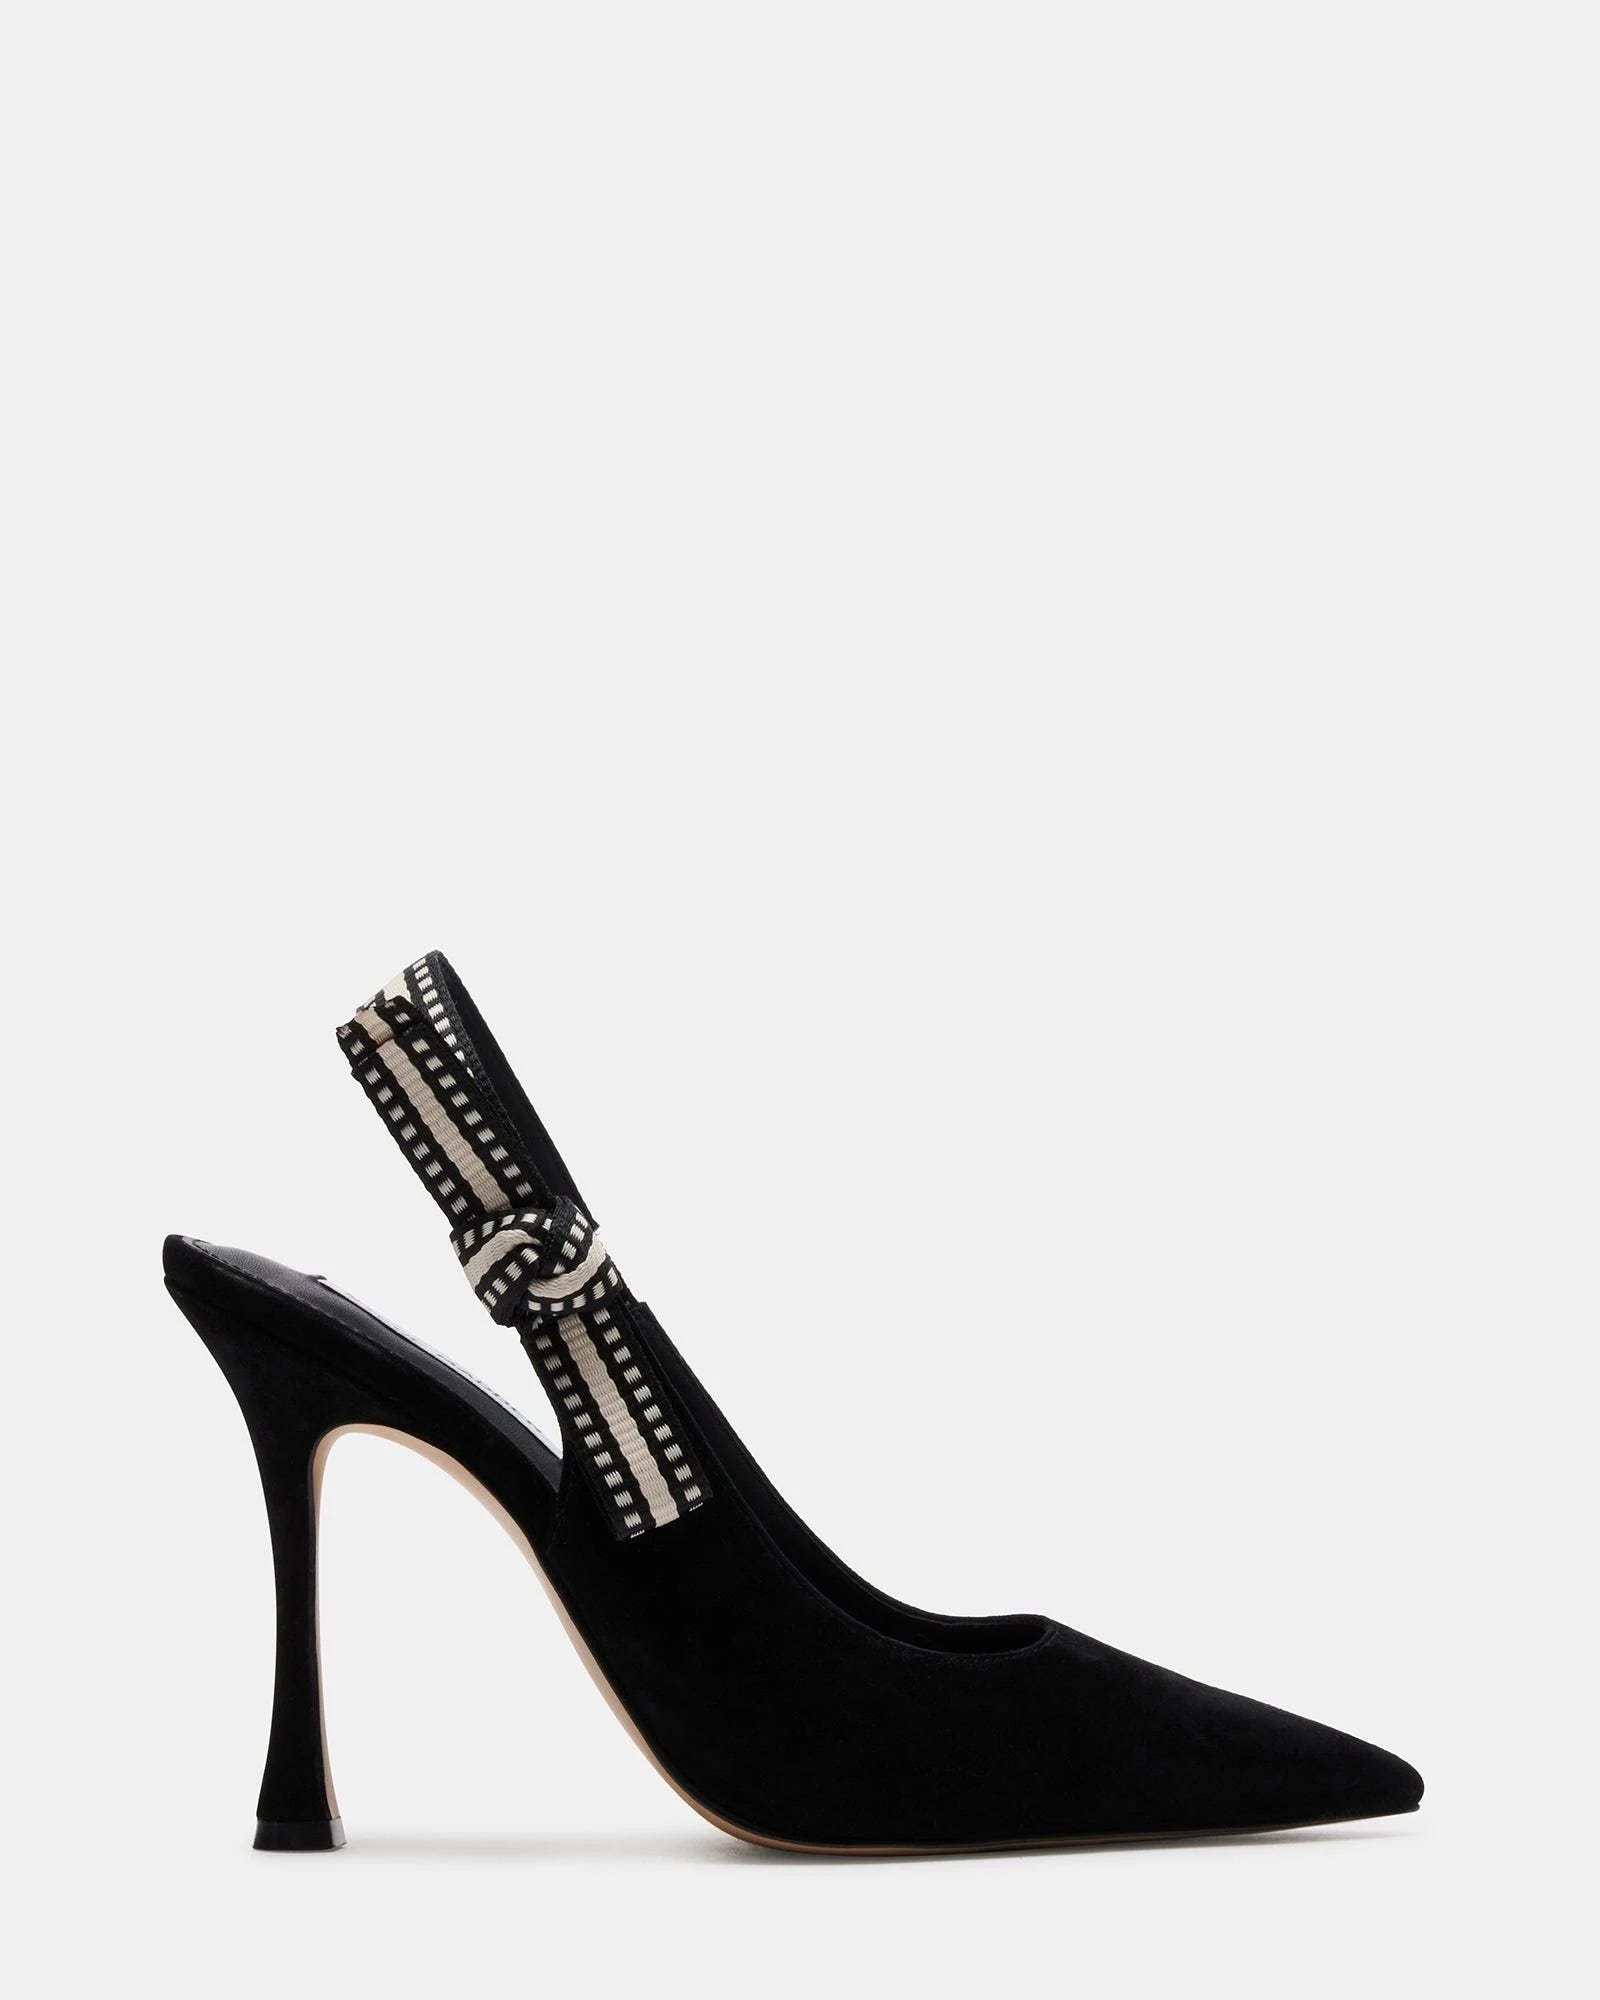 Stylish Black Slingback Pumps with Pointed Toe and 4-Inch Heel | Image